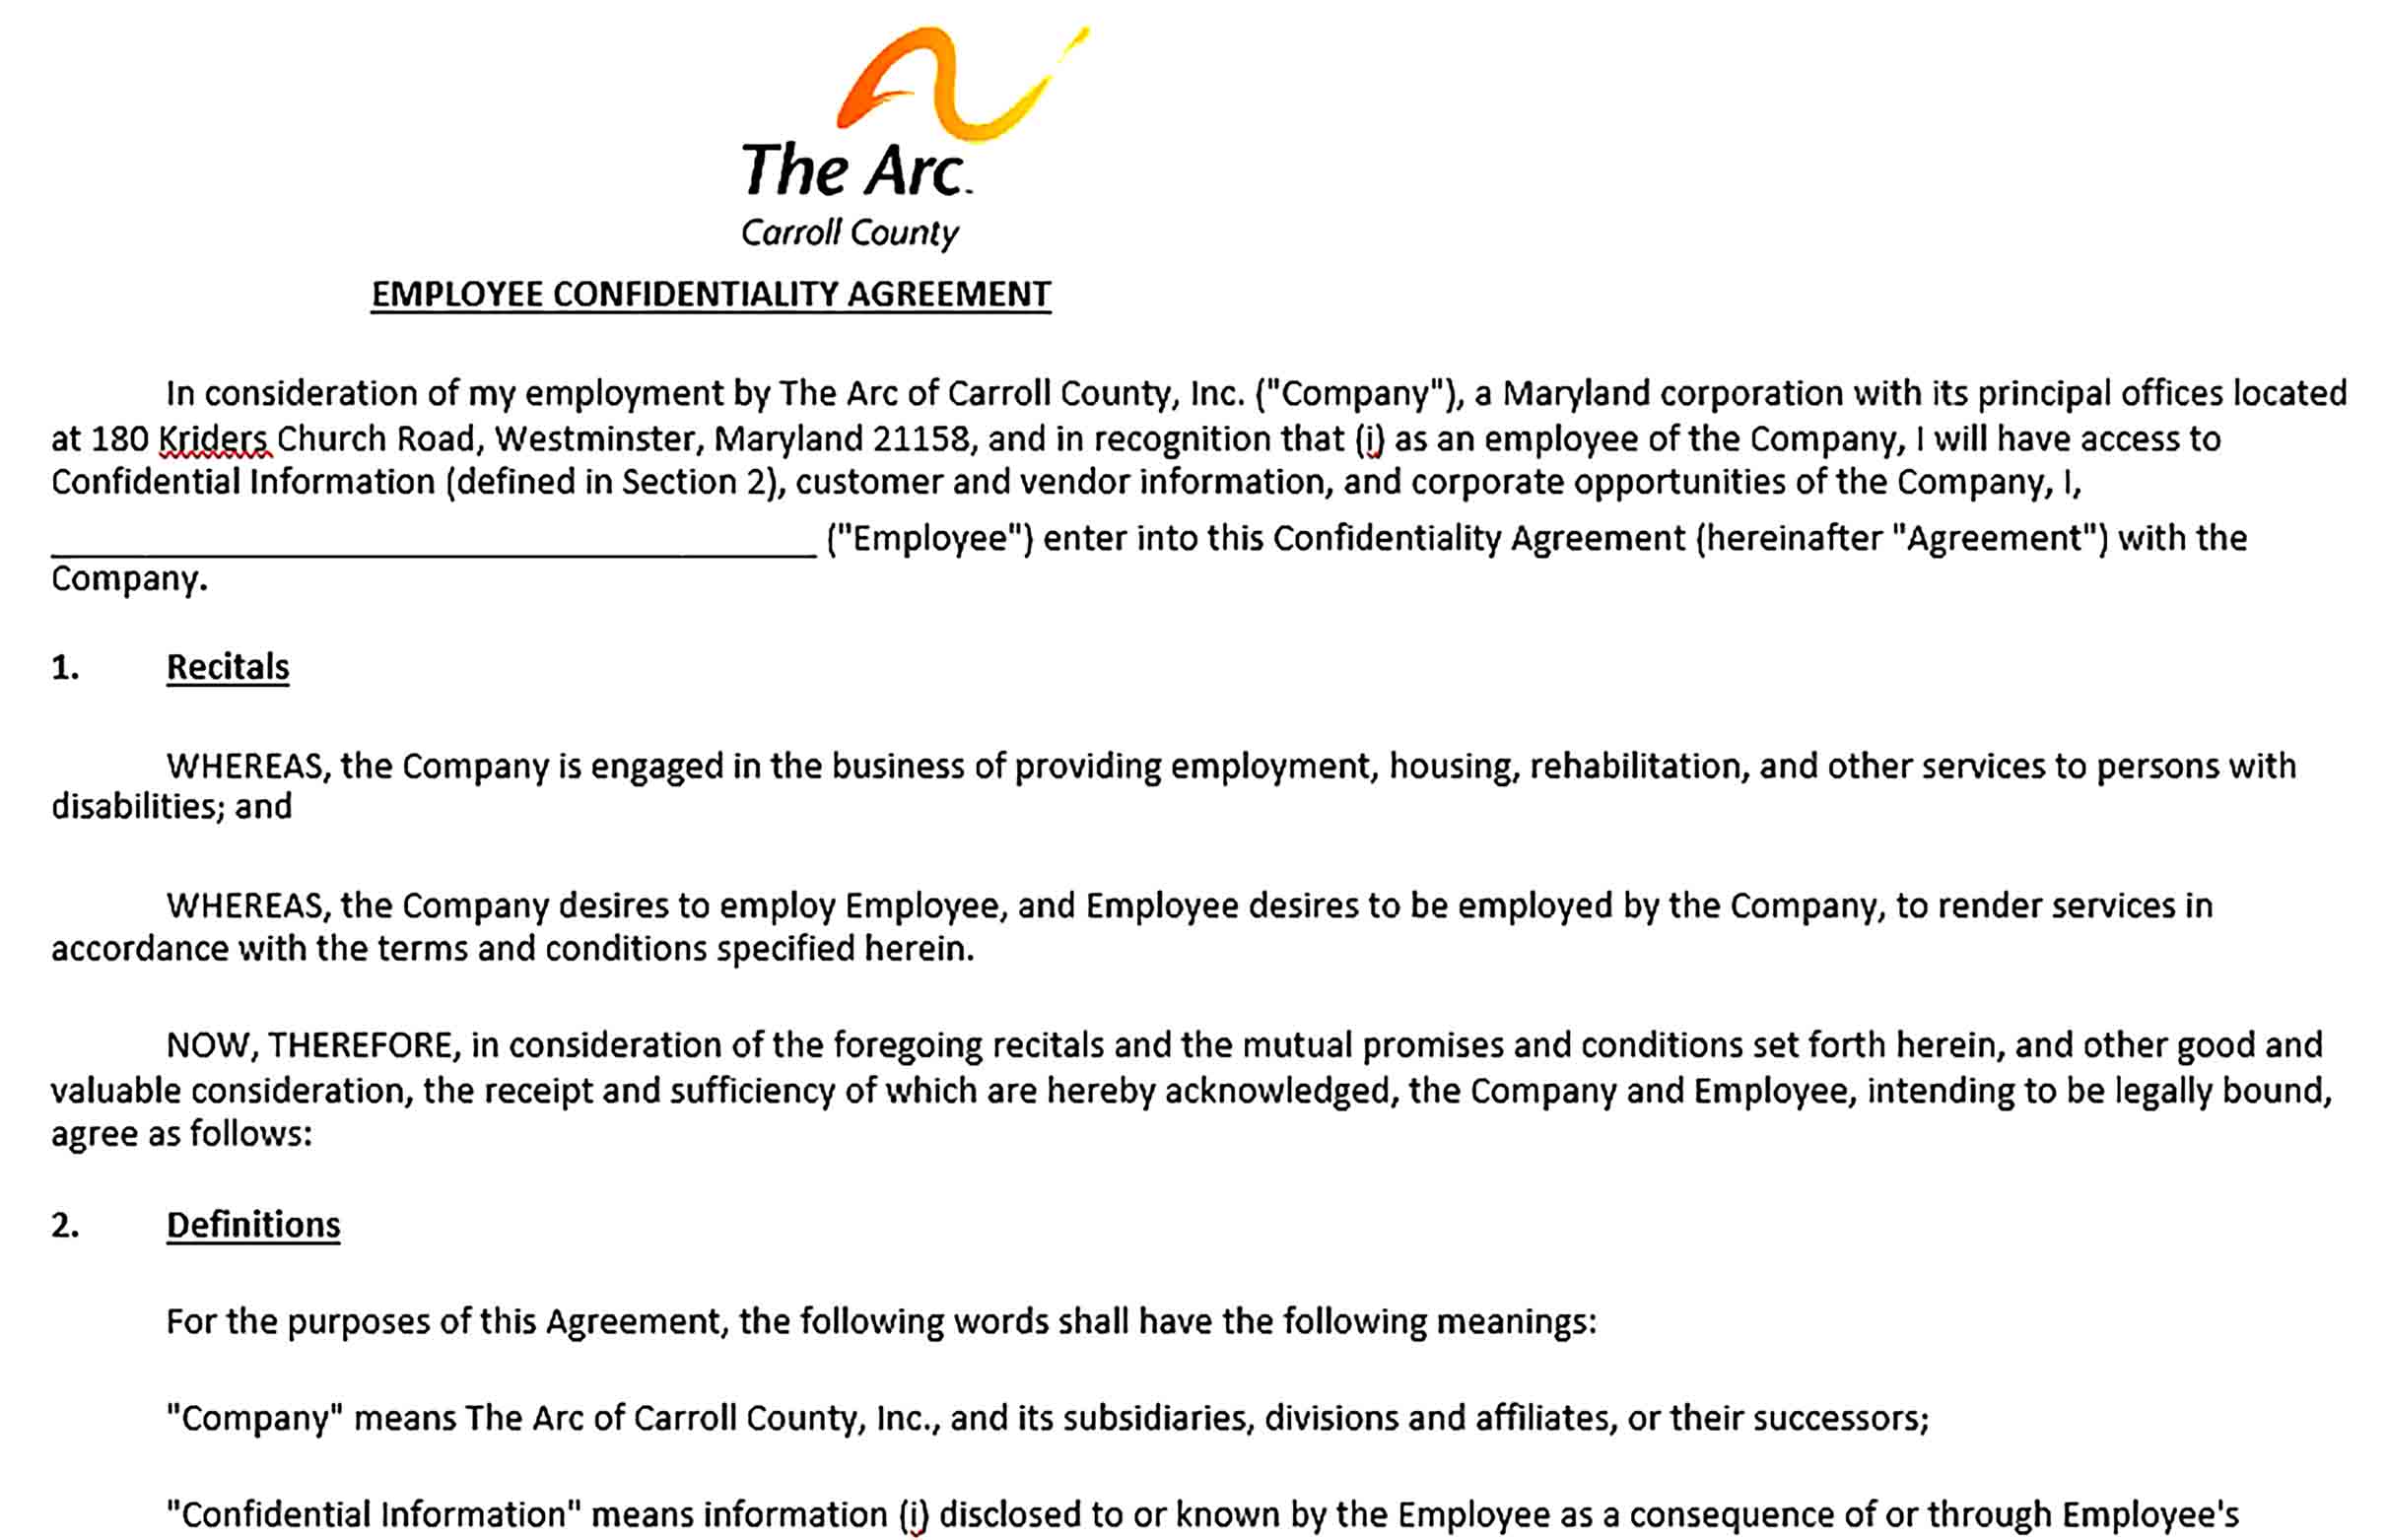 Sample Employee Confidentiality Agreement 002